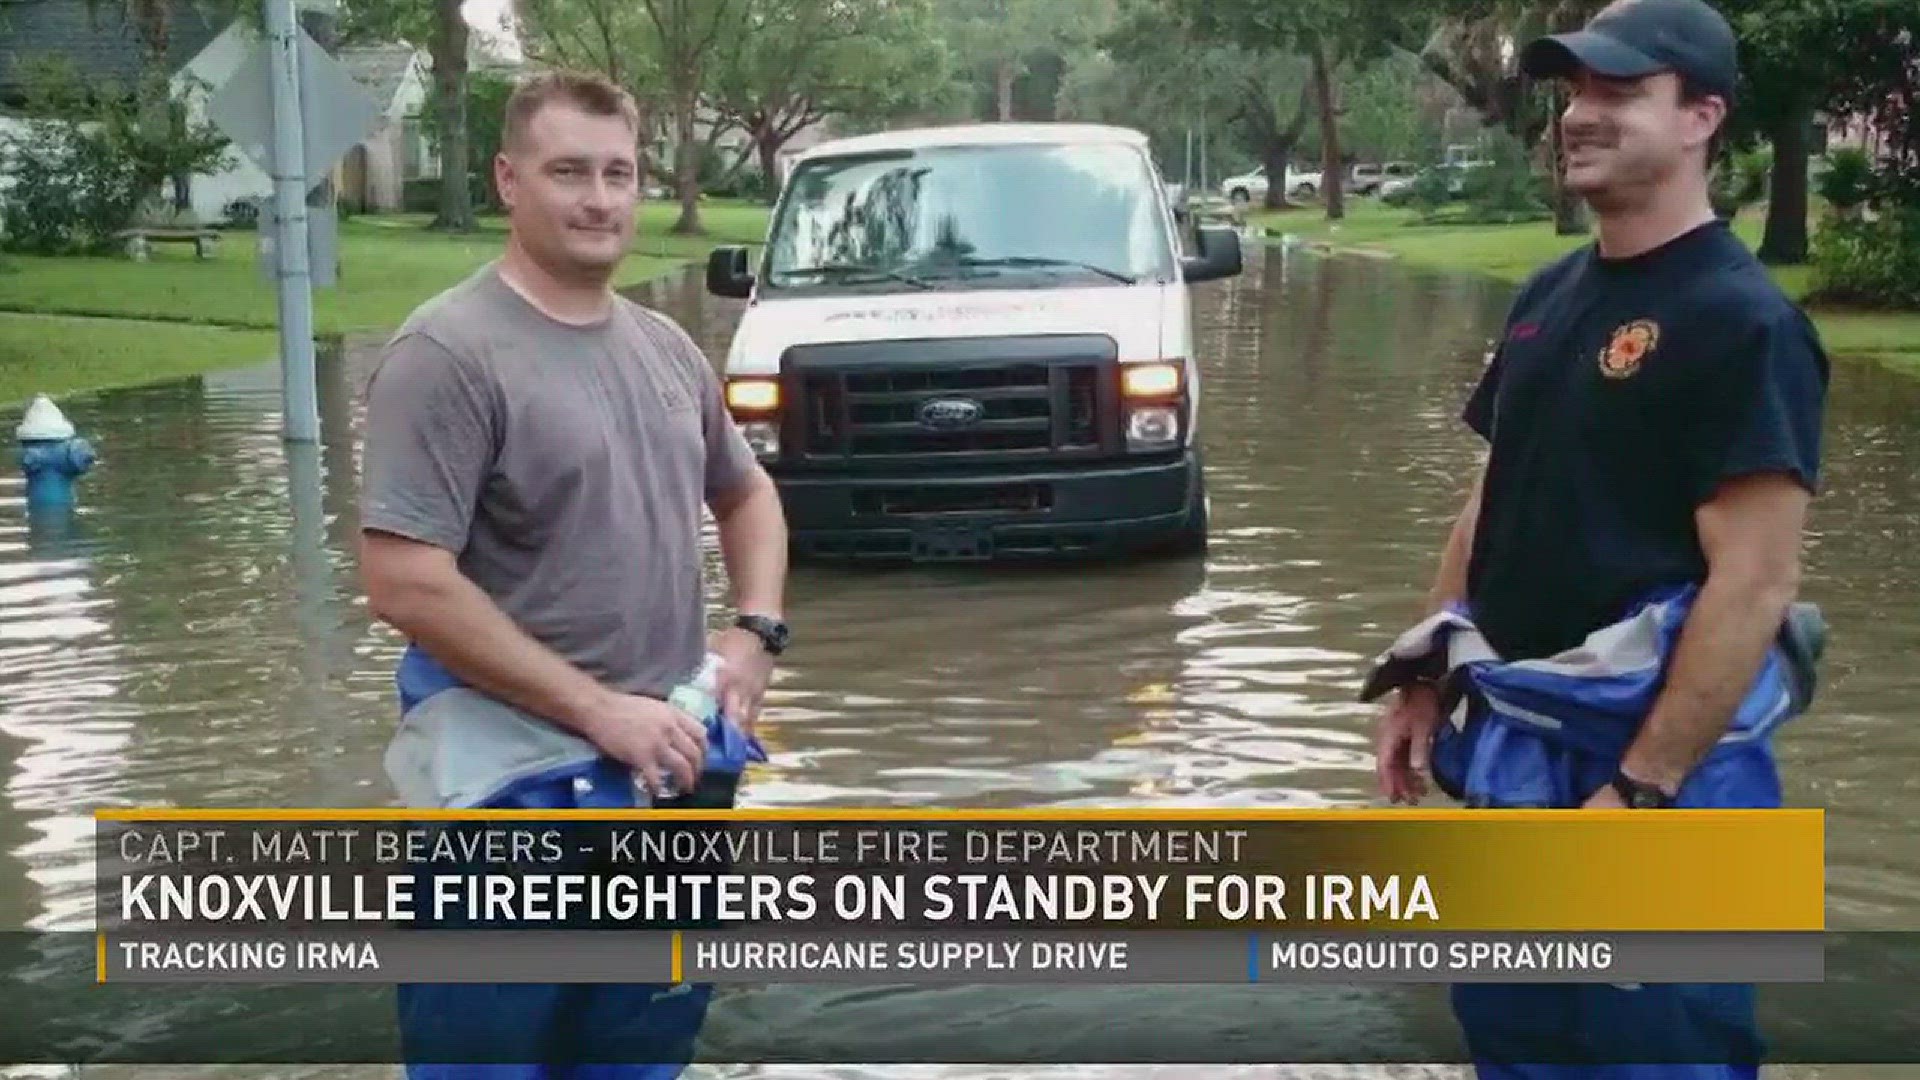 After 8 days working in Houston to help Hurricane Harvey victims, they are back home. But are now on standby to help victims of Hurricane Irma.